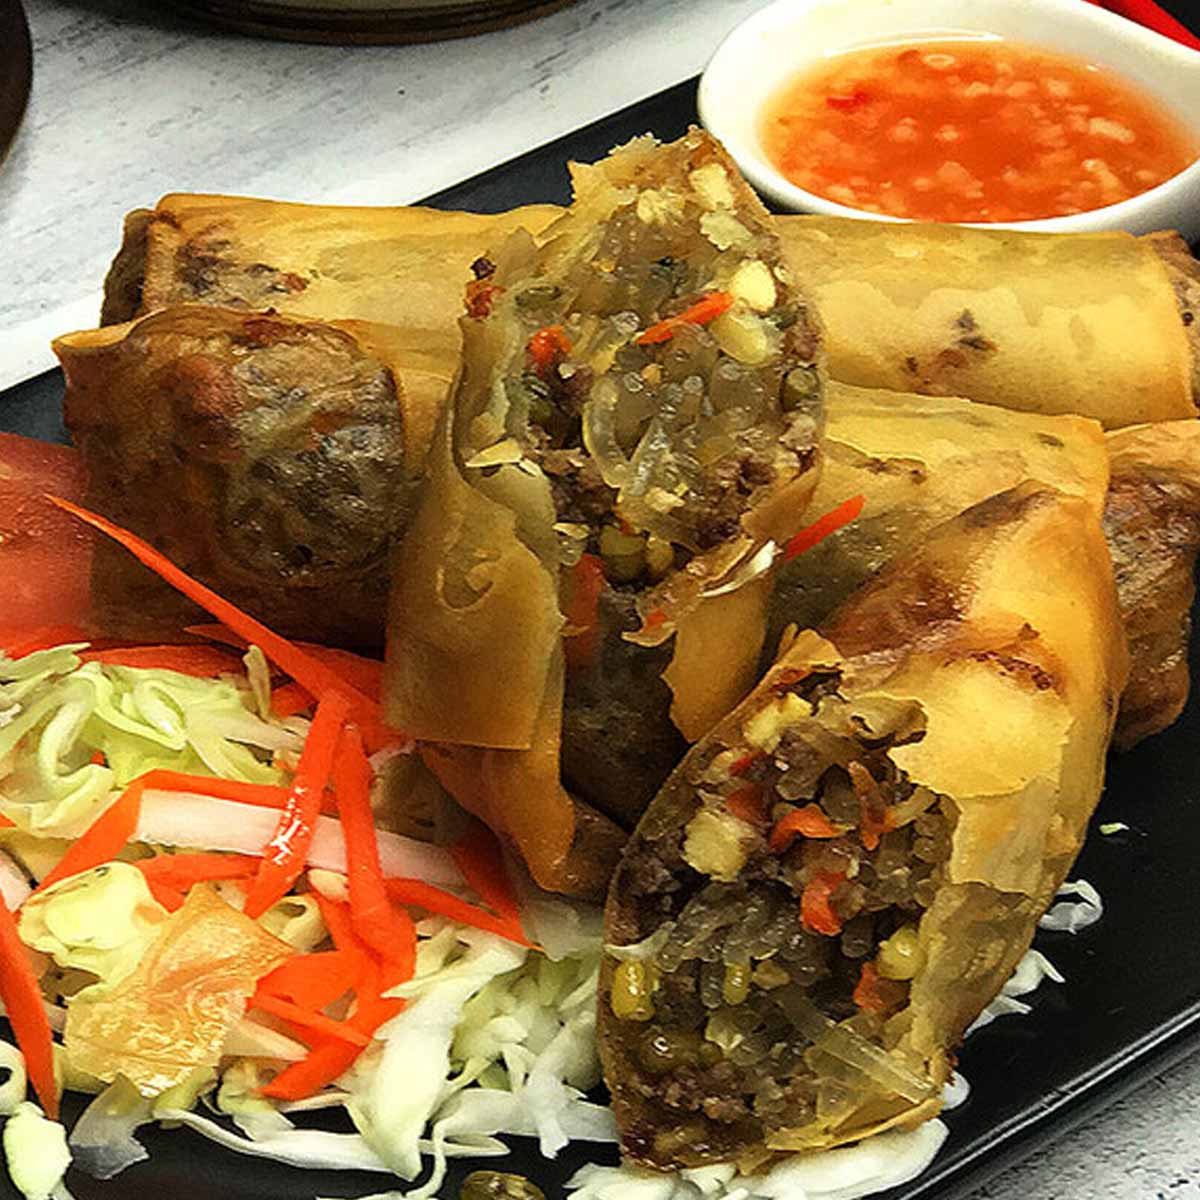 Learn how to make homemade egg rolls that are crunchy and not sodden with cooking oil. Don't get intimidated cooking this dish, just follow the tips to get egg rolls that are neither too dry or too soggy.